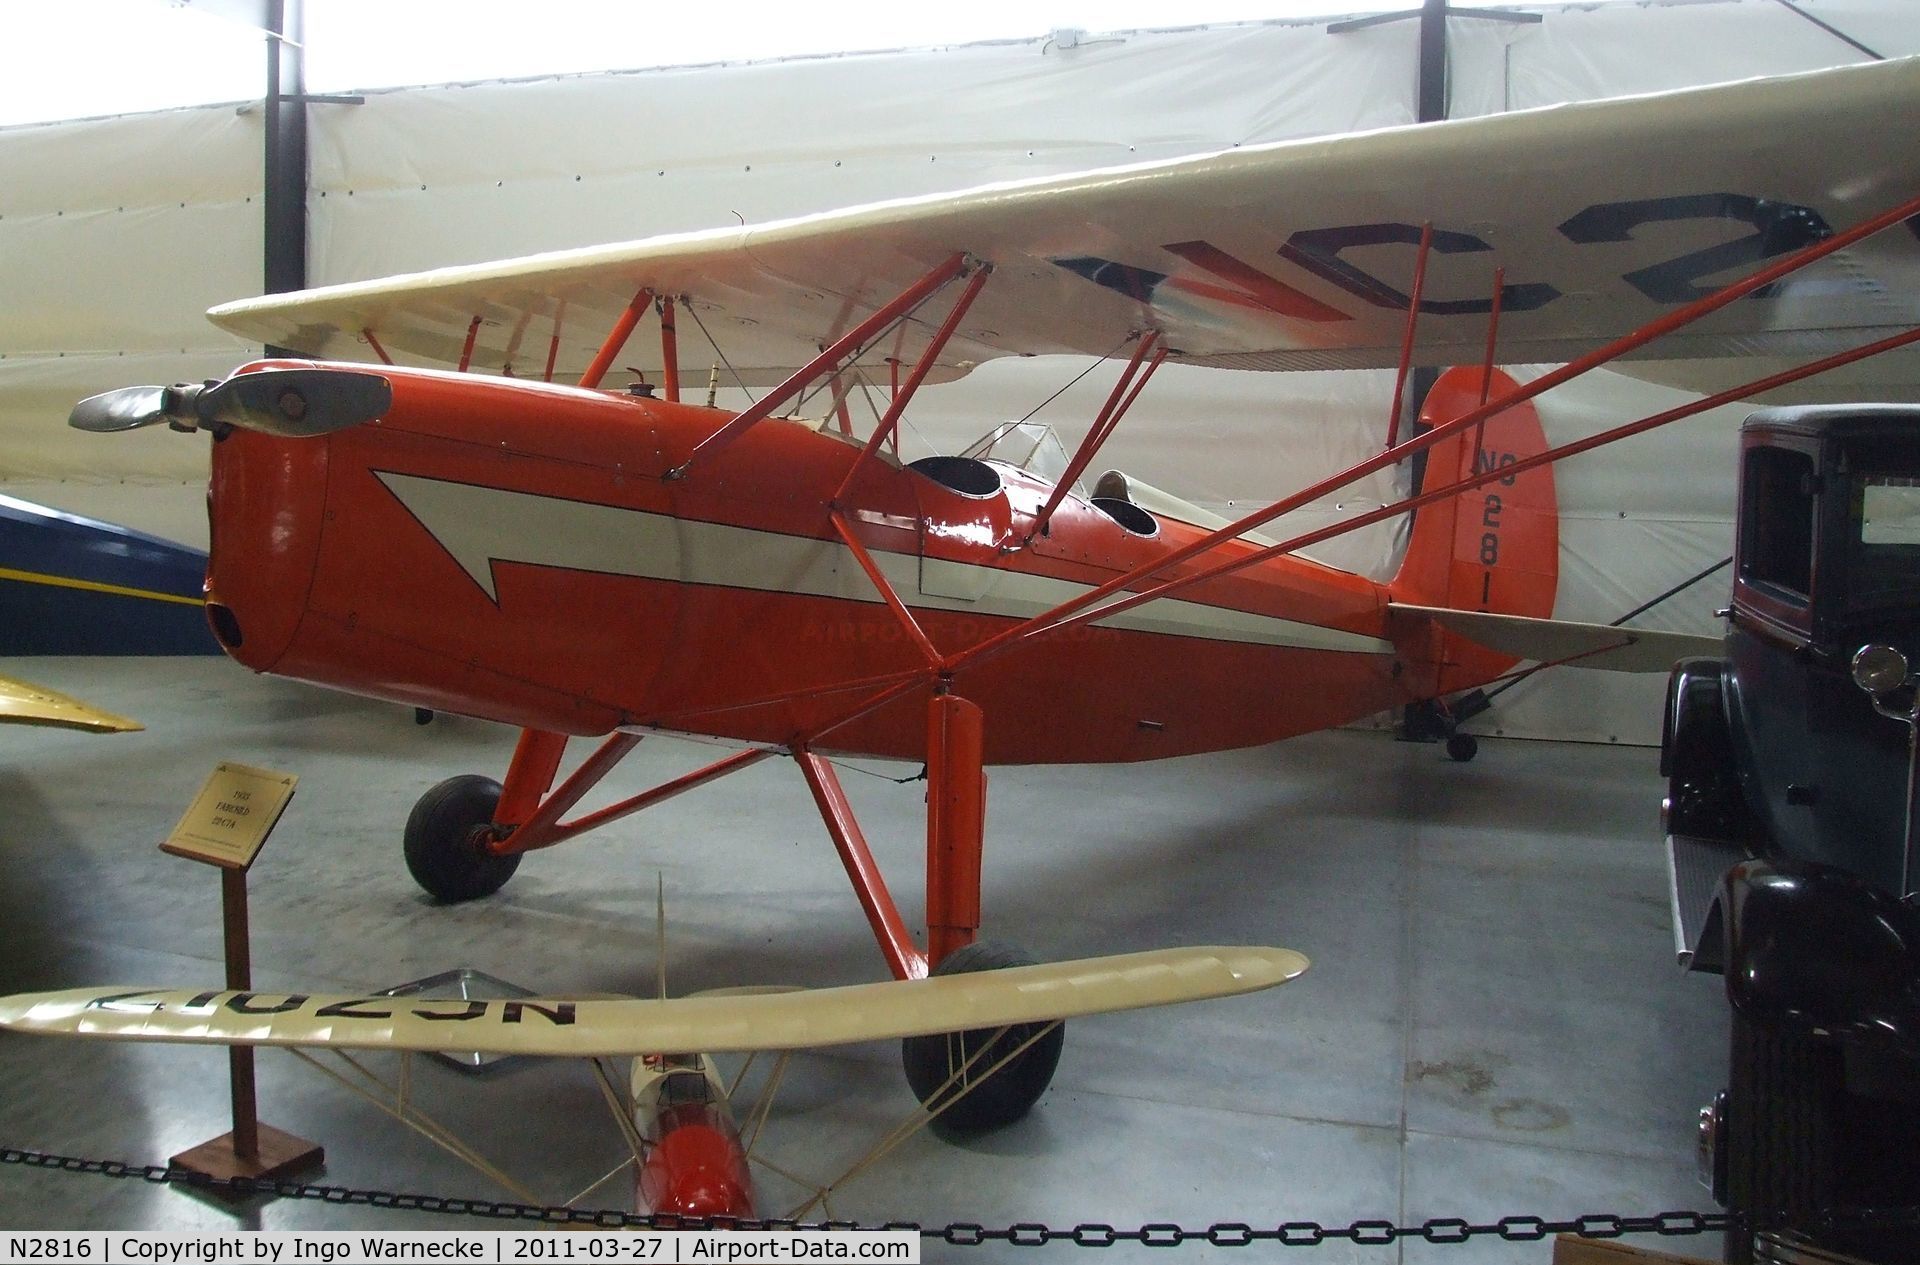 N2816, 1933 Fairchild 22 C7A C/N 1053, Fairchild 22 C7A at the Western Antique Aeroplane and Automobile Museum, Hood River OR